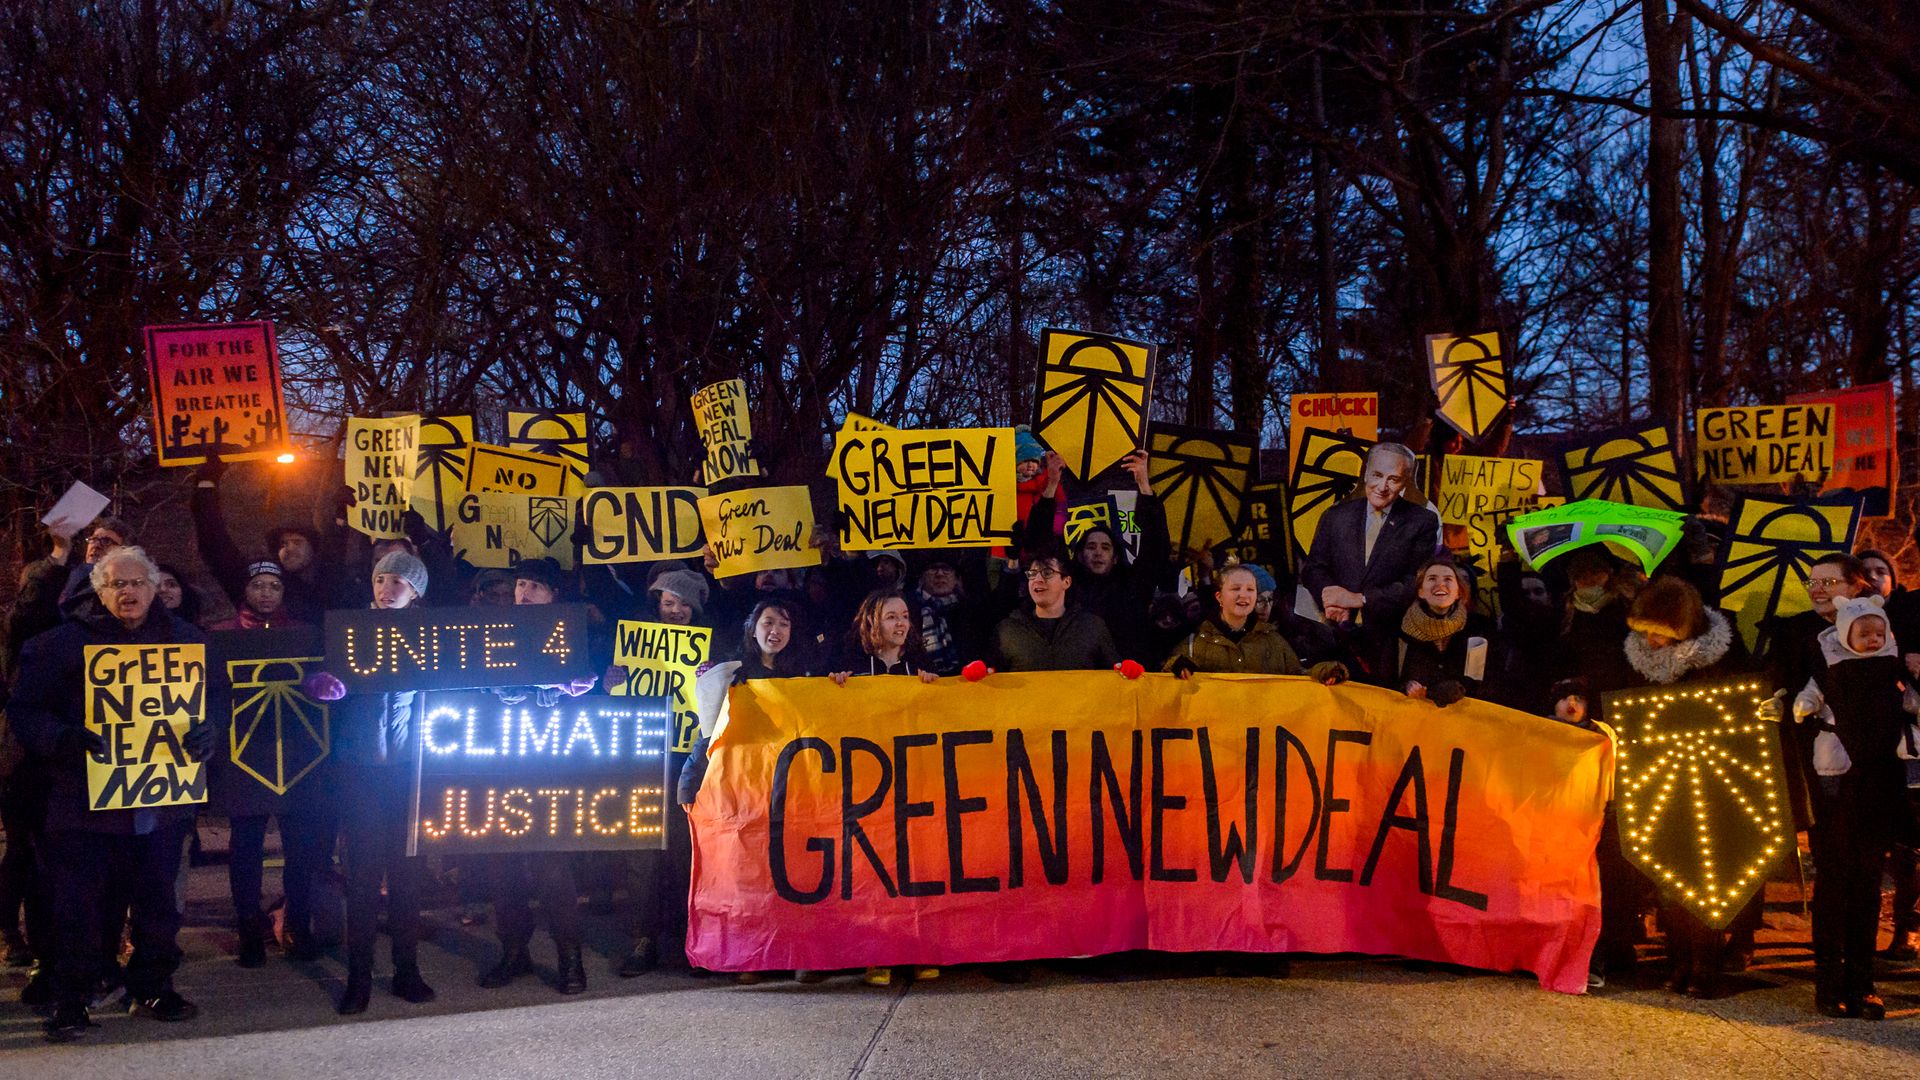 In this image, a line of demonstrators holding various signs support an orange banner that says "Green New Deal."